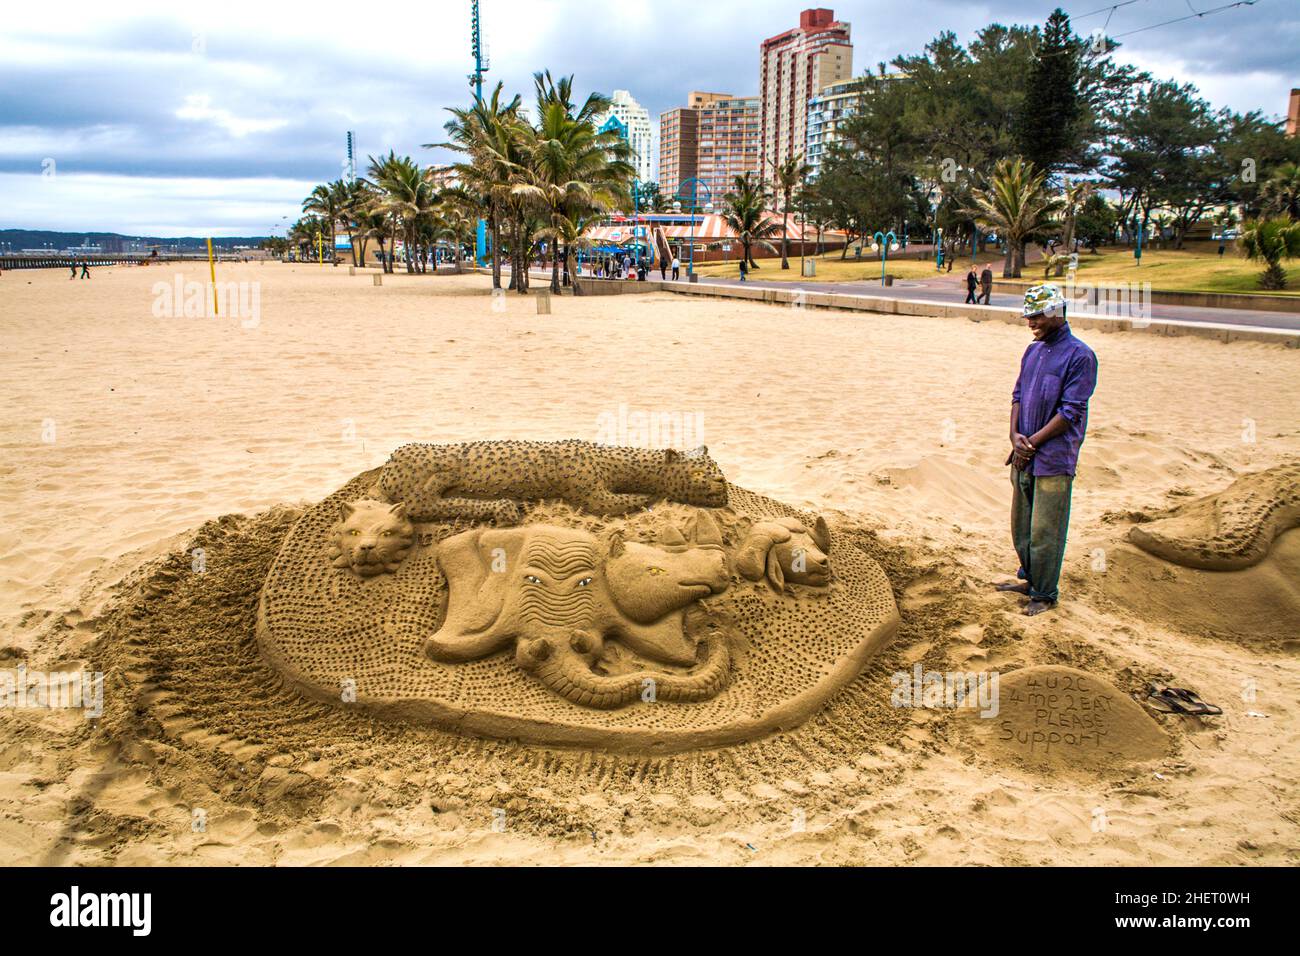 Wild animals made of sand at the Durban Stand, South Africa, Durban Stock Photo